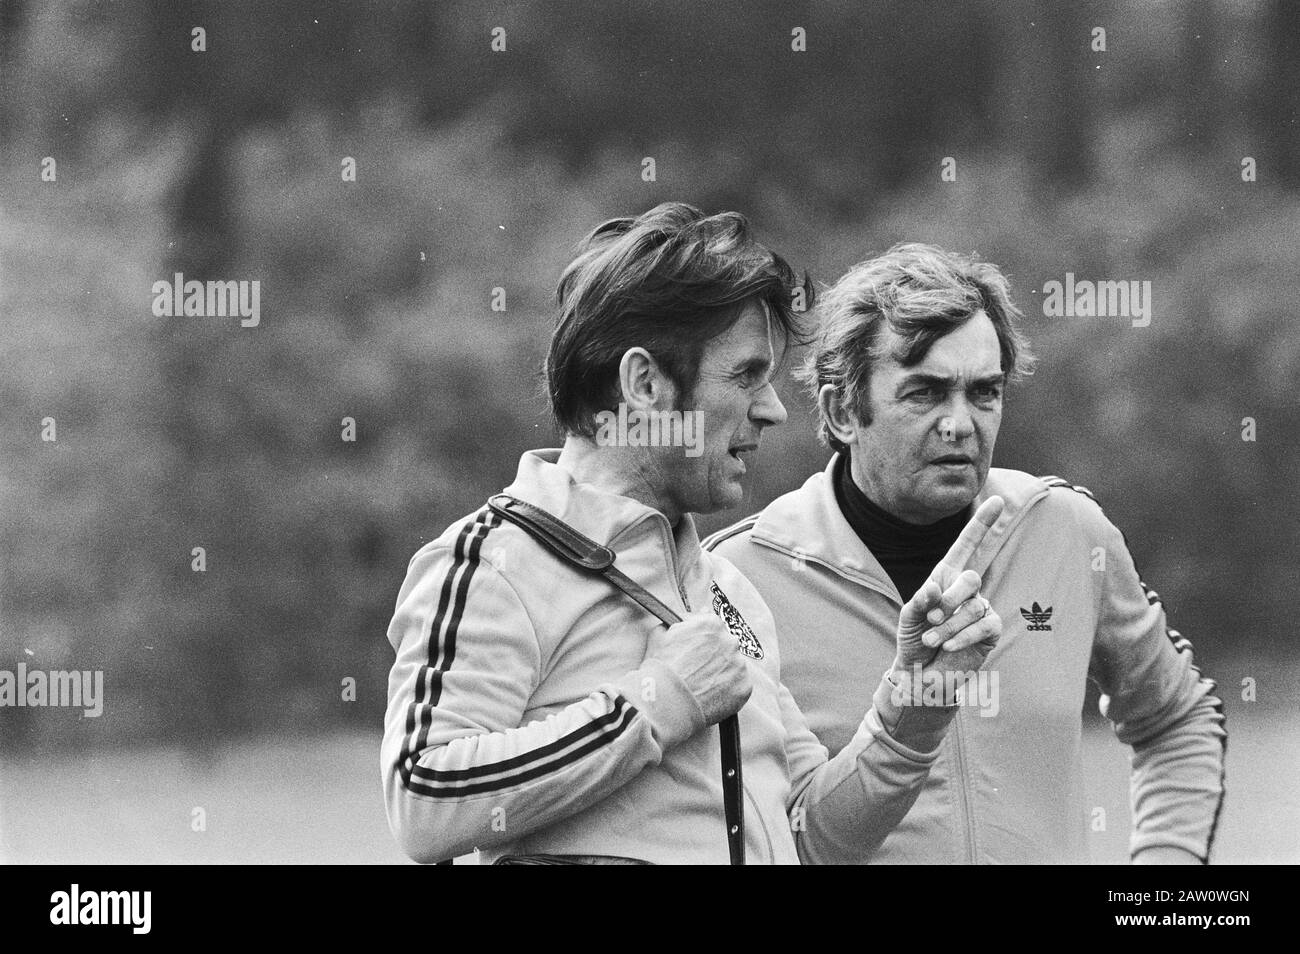 Practice match Dutch team against Xerxes; . No. 14 trainers Black Cross (l) and Happel, No. 15 Hugo Hovenkamp middle with ball, with knee ligament. Date: May 23, 1978 Keywords: sport, football Person Name: Hugo Hovenkamp Stock Photo